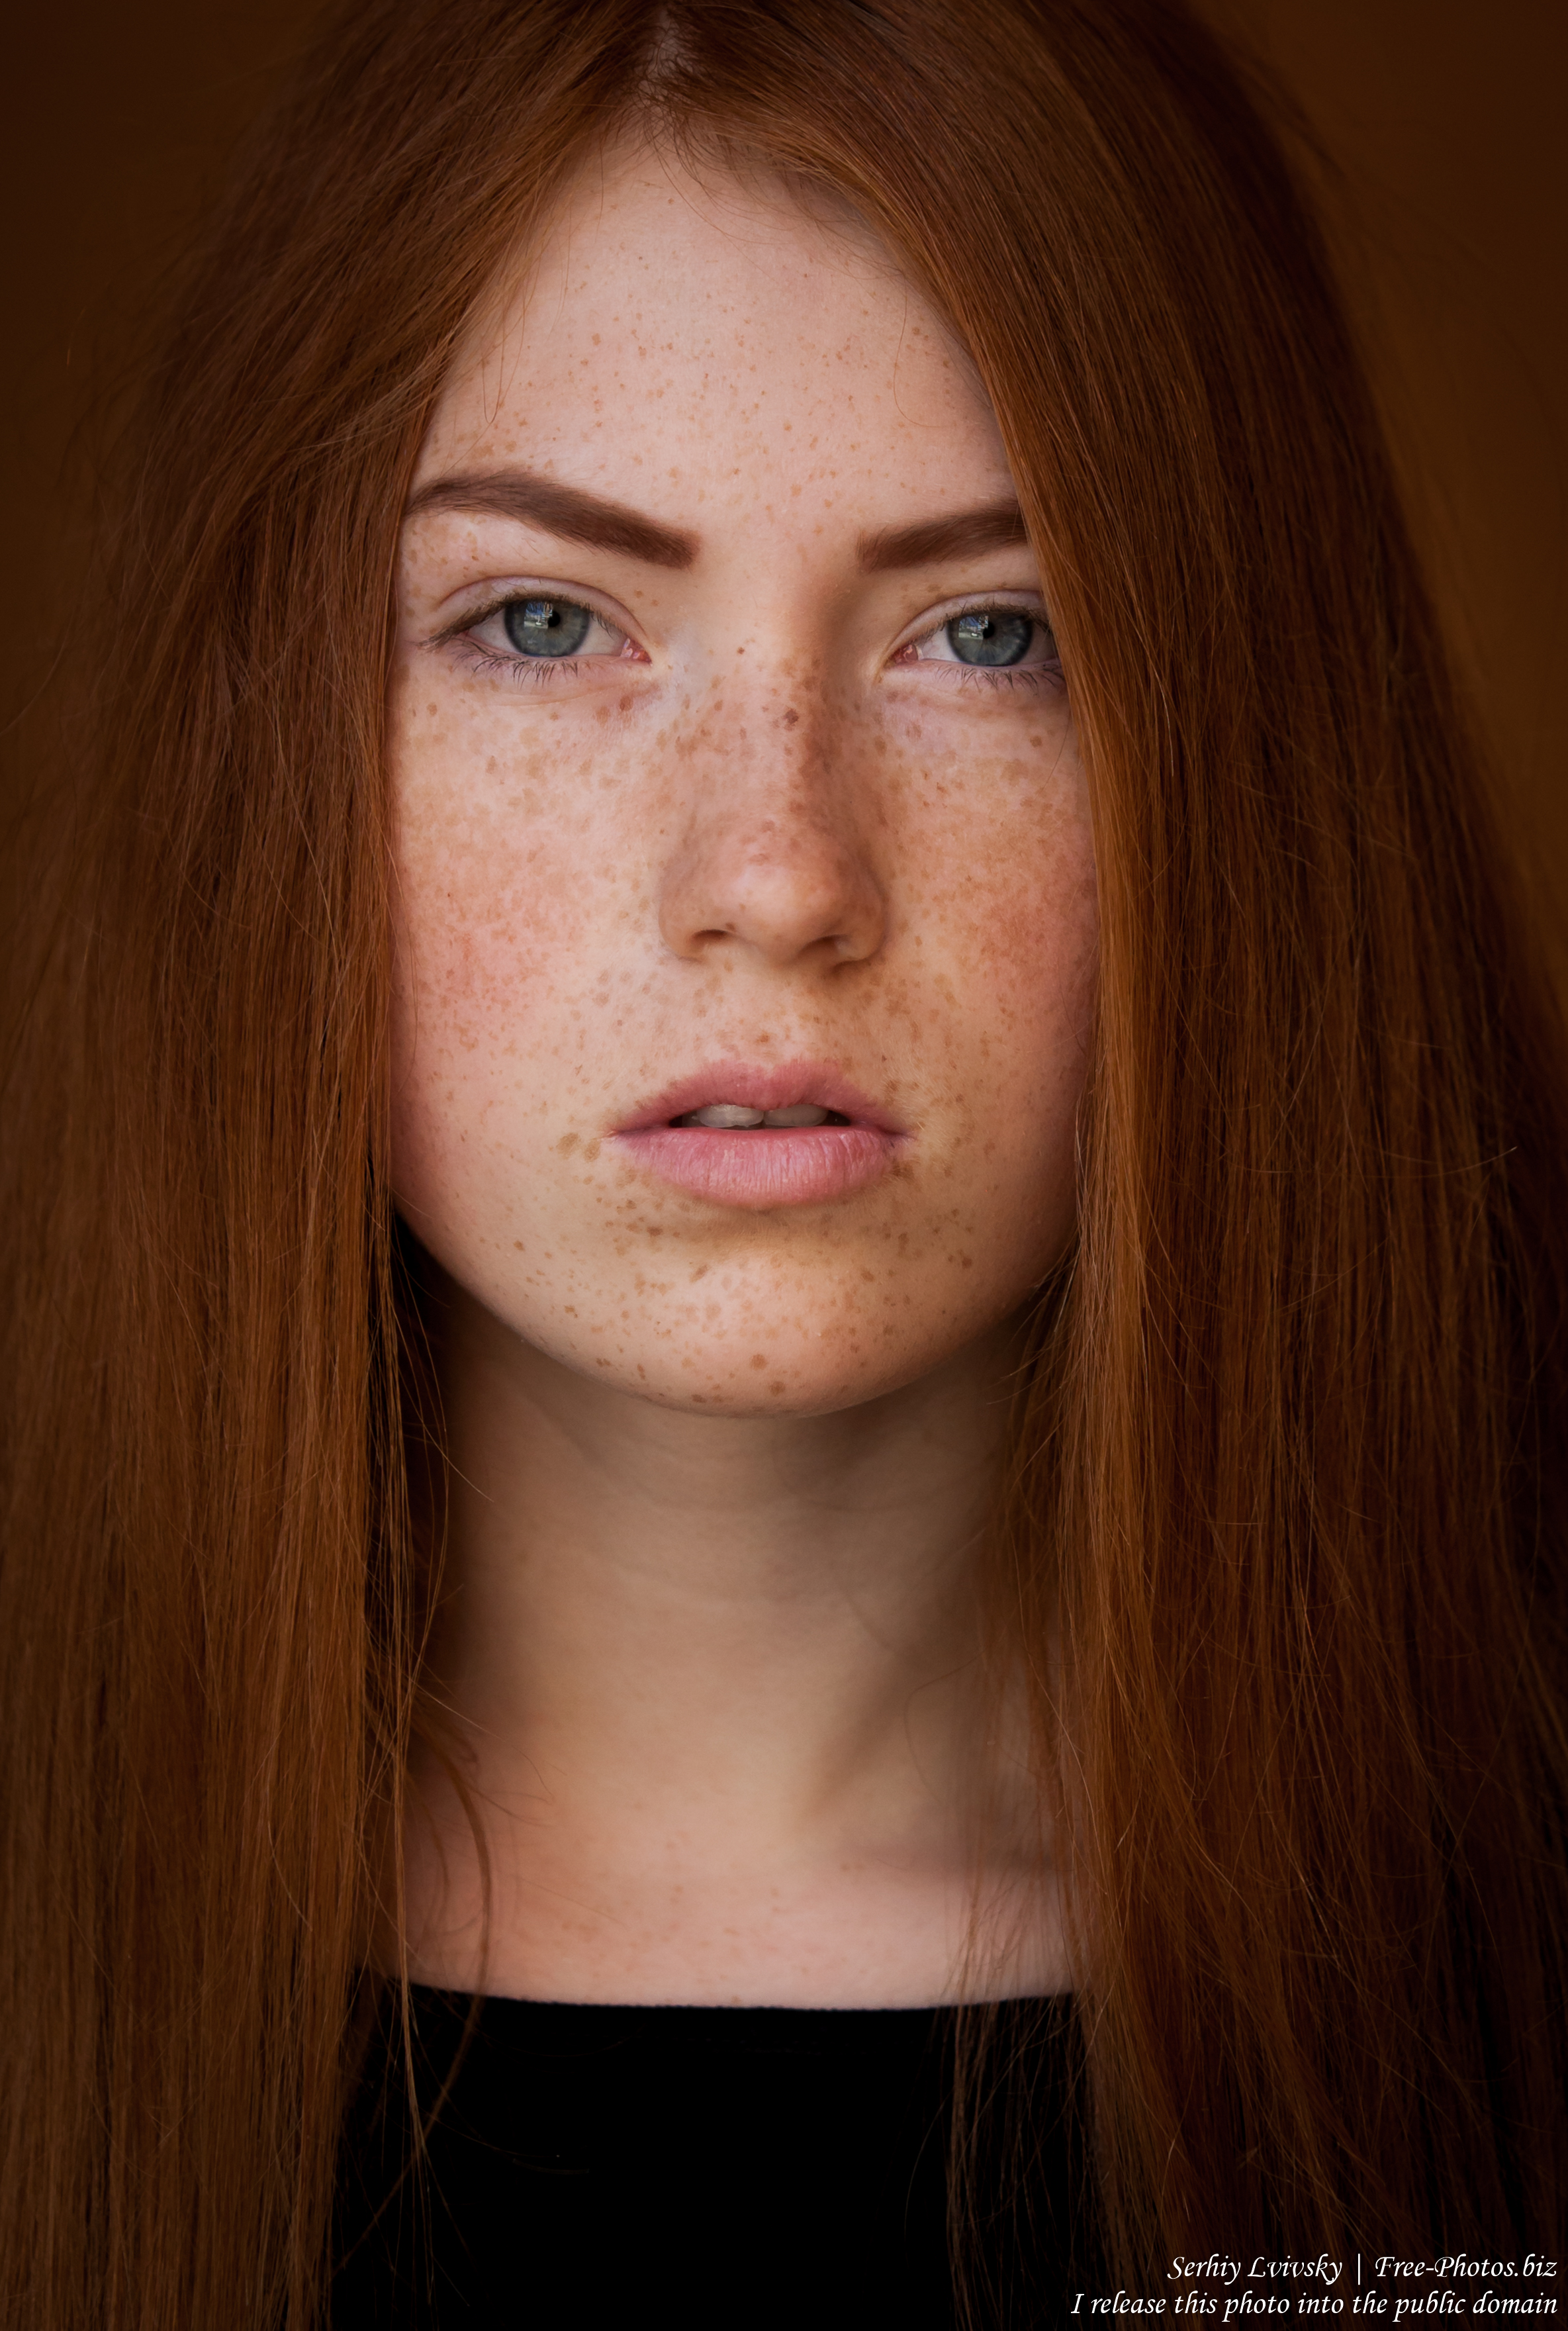 a 15-year-old red-haired Catholic girl photographed by Serhiy Lvivsky in August 2015, picture 11